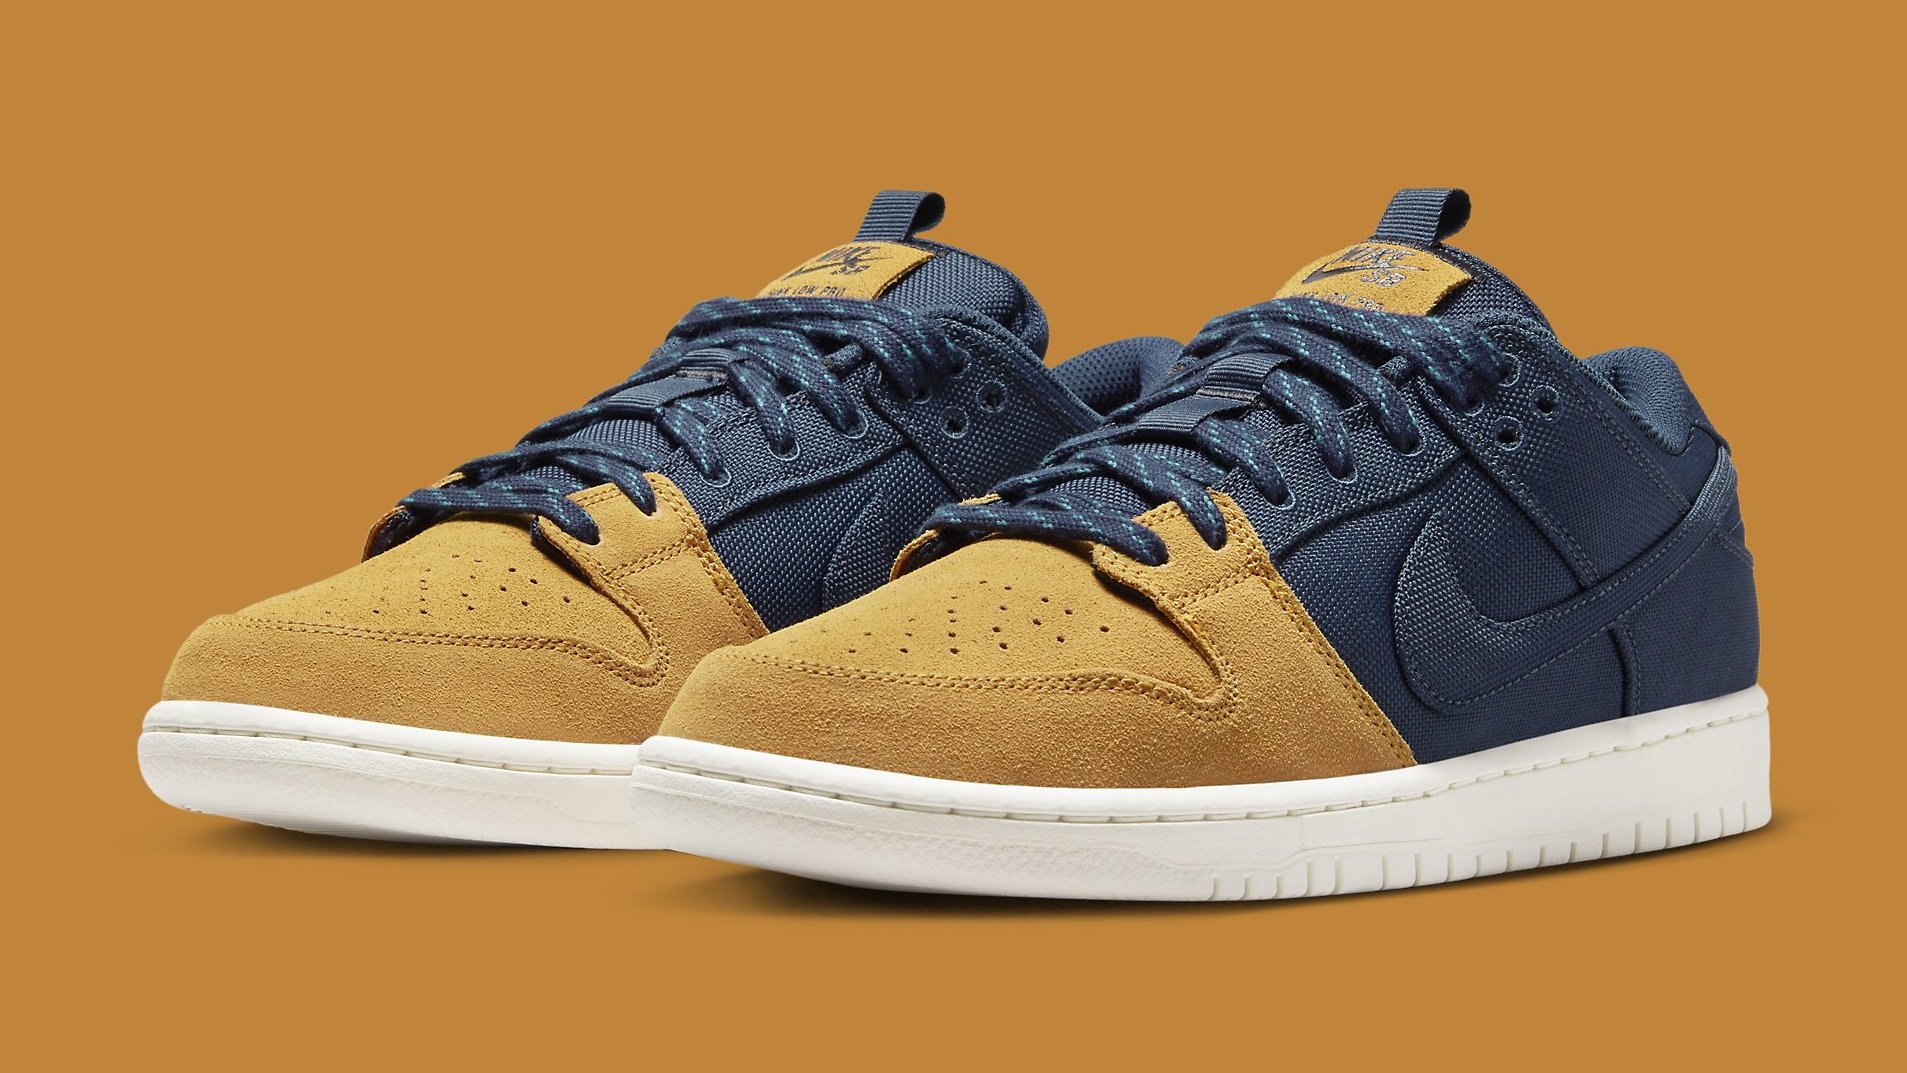 Backpacks Inspire This Nike SB Dunk Low